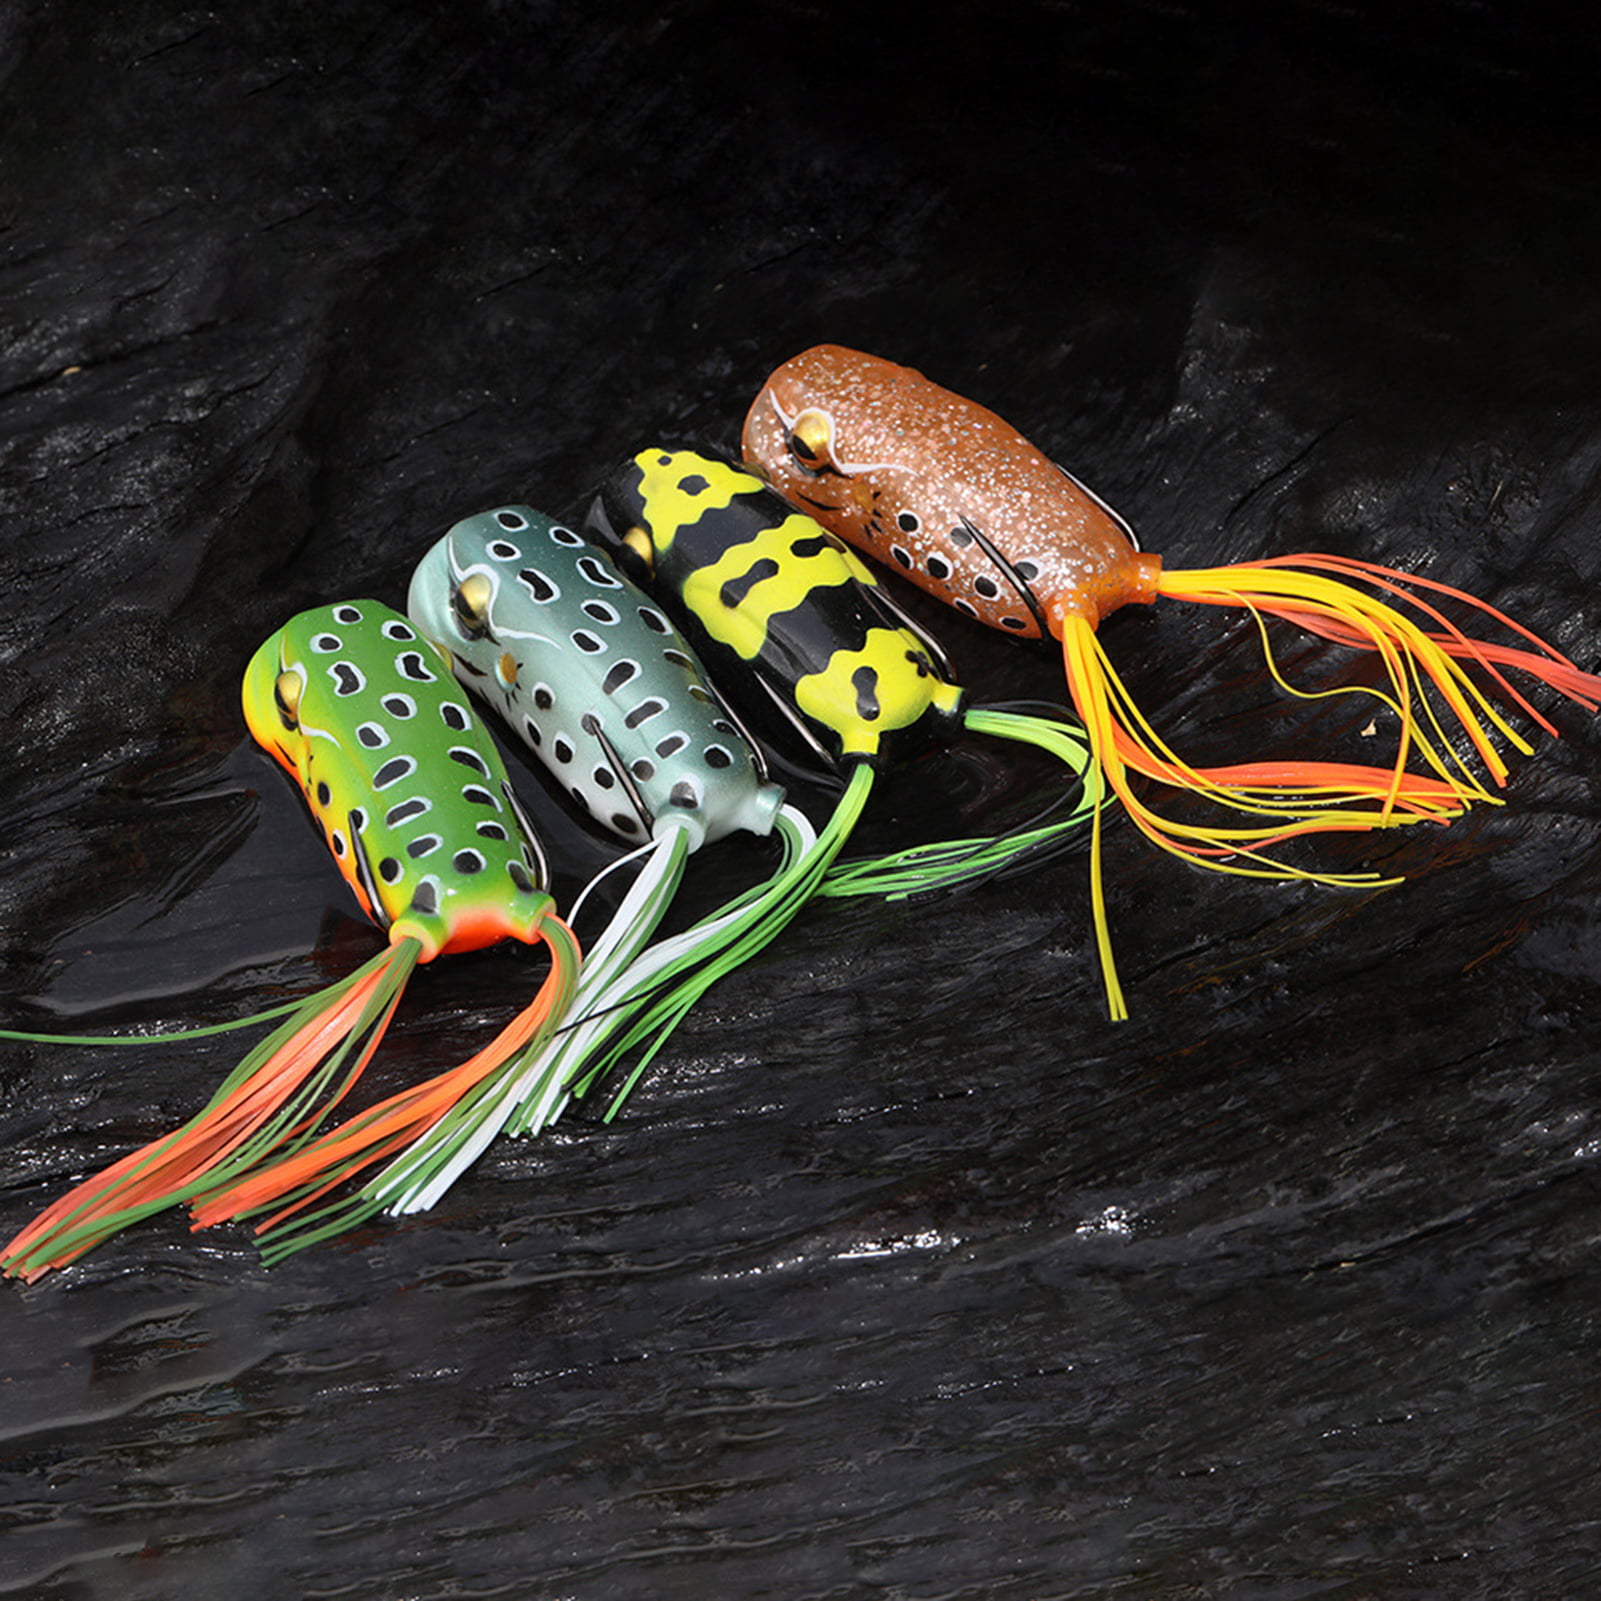 Frog Lure, Mouse Lure, Spider Lure, Trout Fishing Lure Kit, Topwater Freshwater Saltwater, Realistic Frog, Soft Bait for Bass